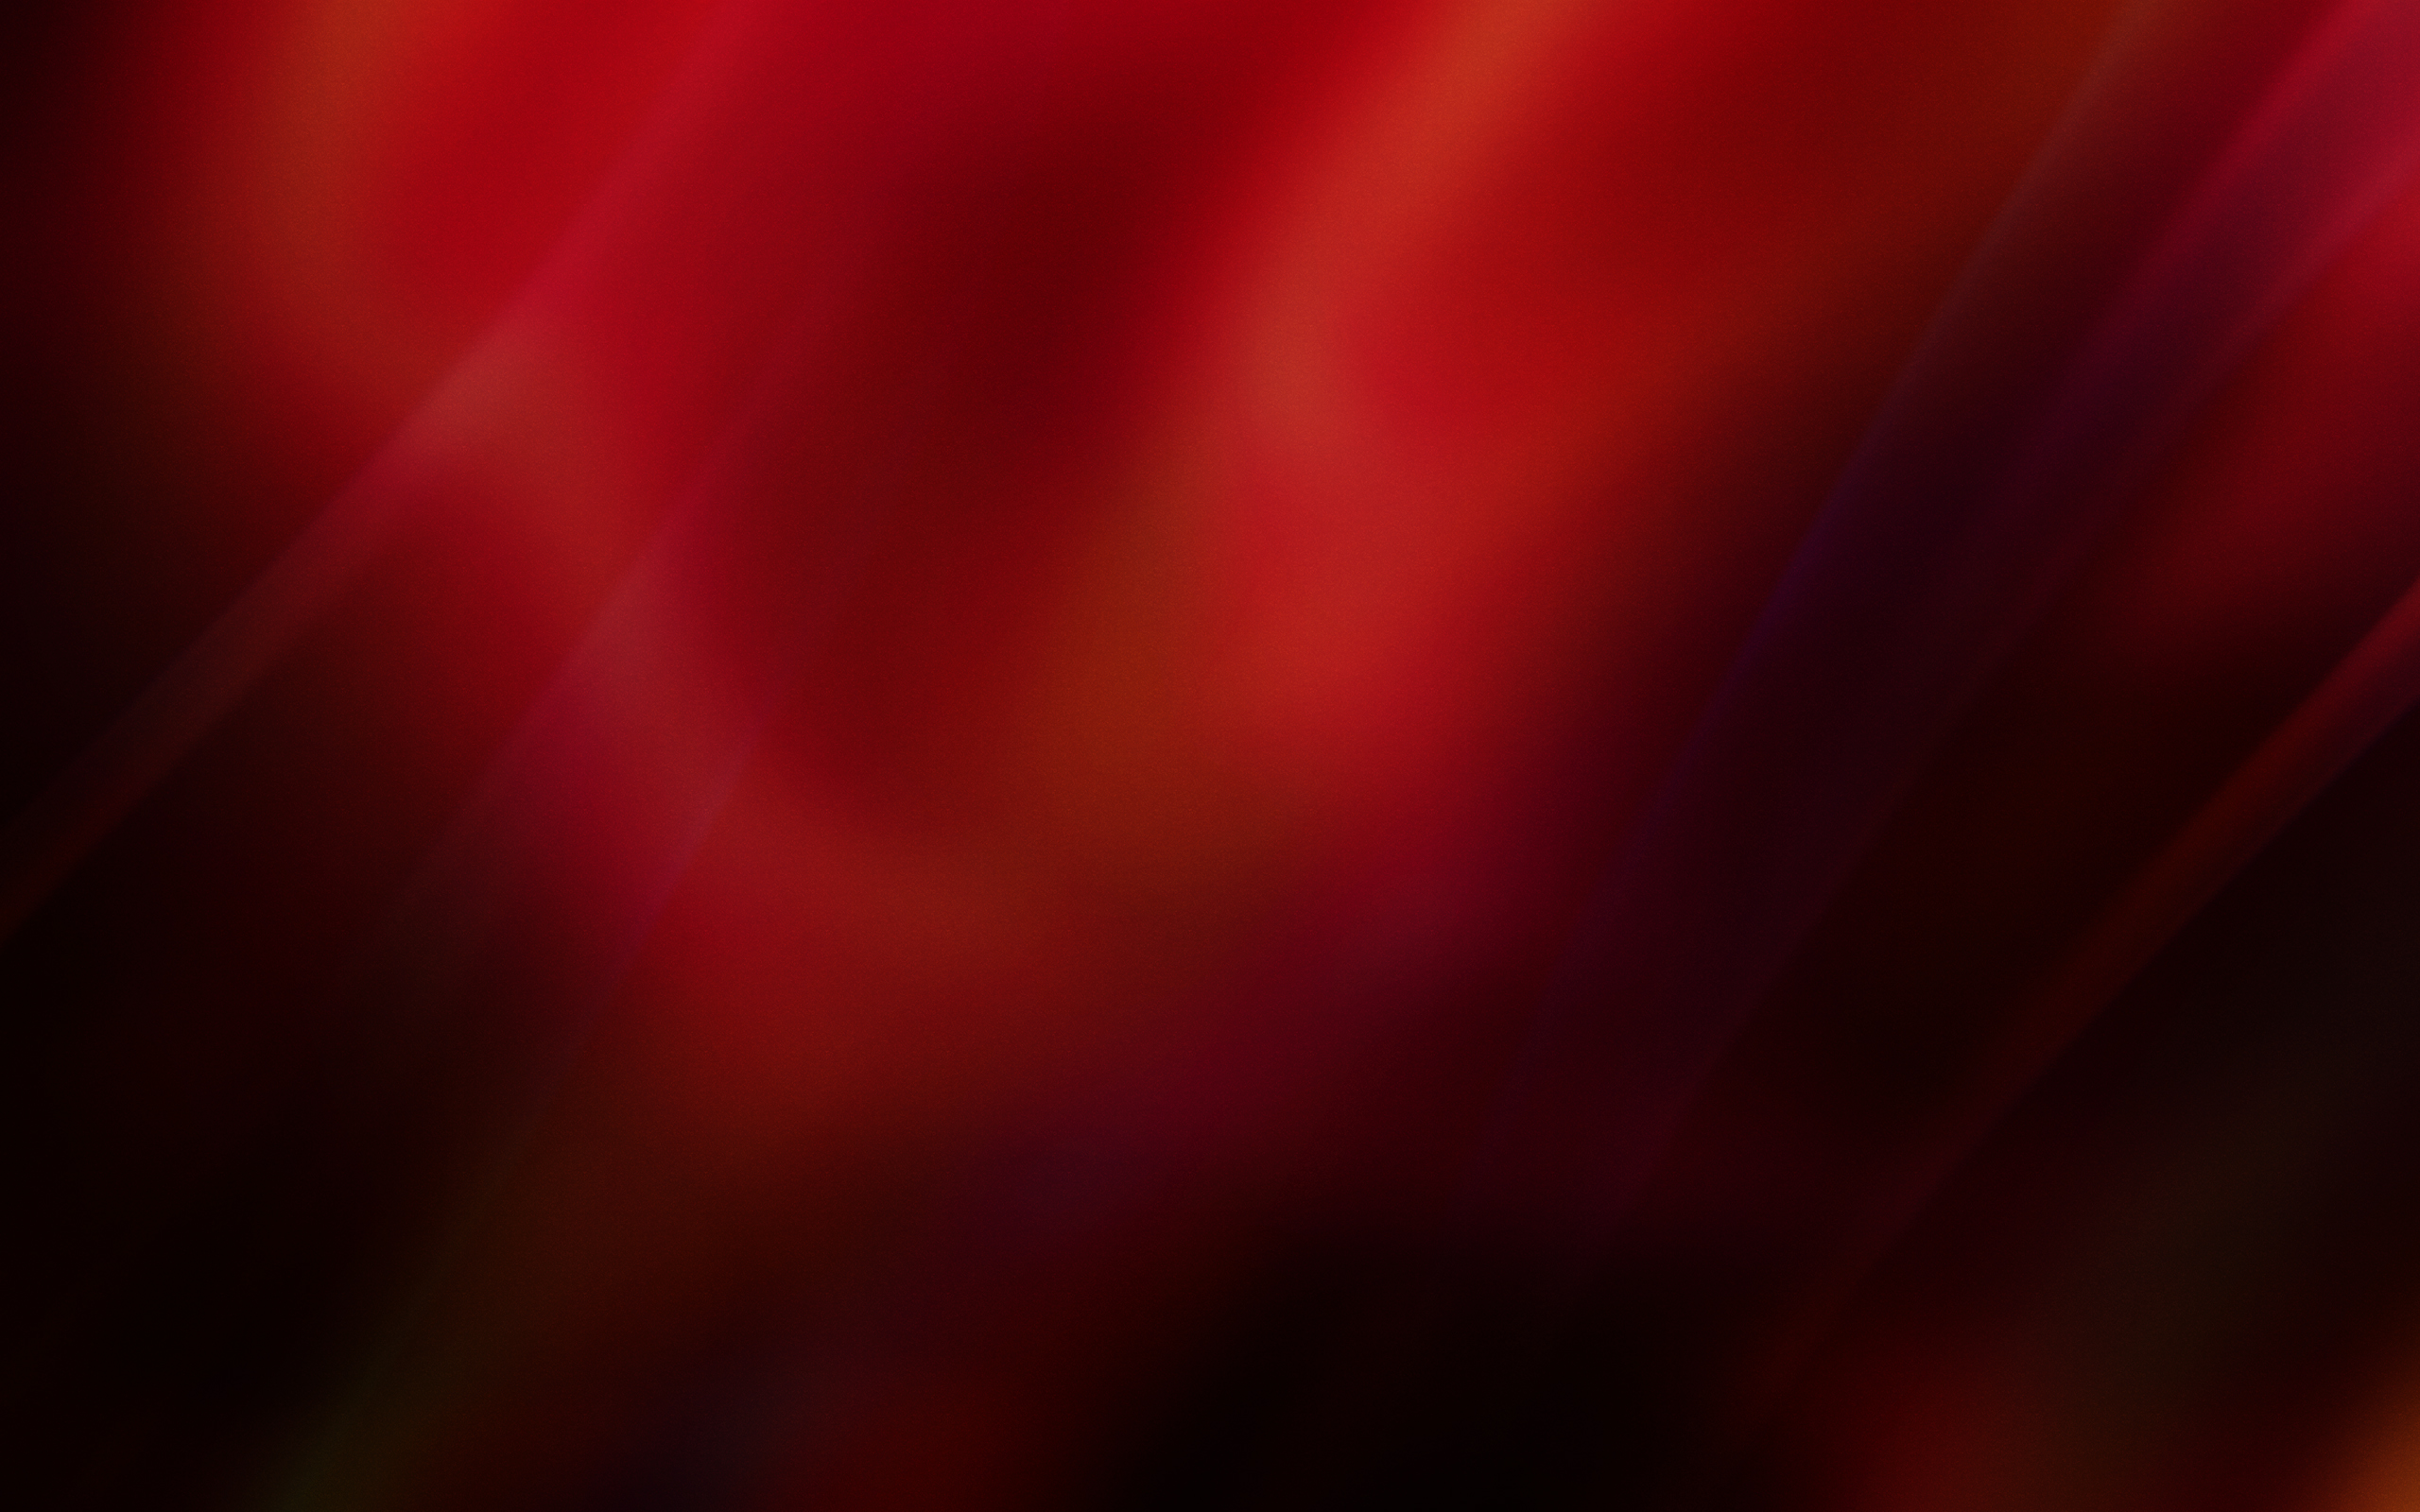 Clear Type Abstract Red And Black Wallpaper And Image Collection